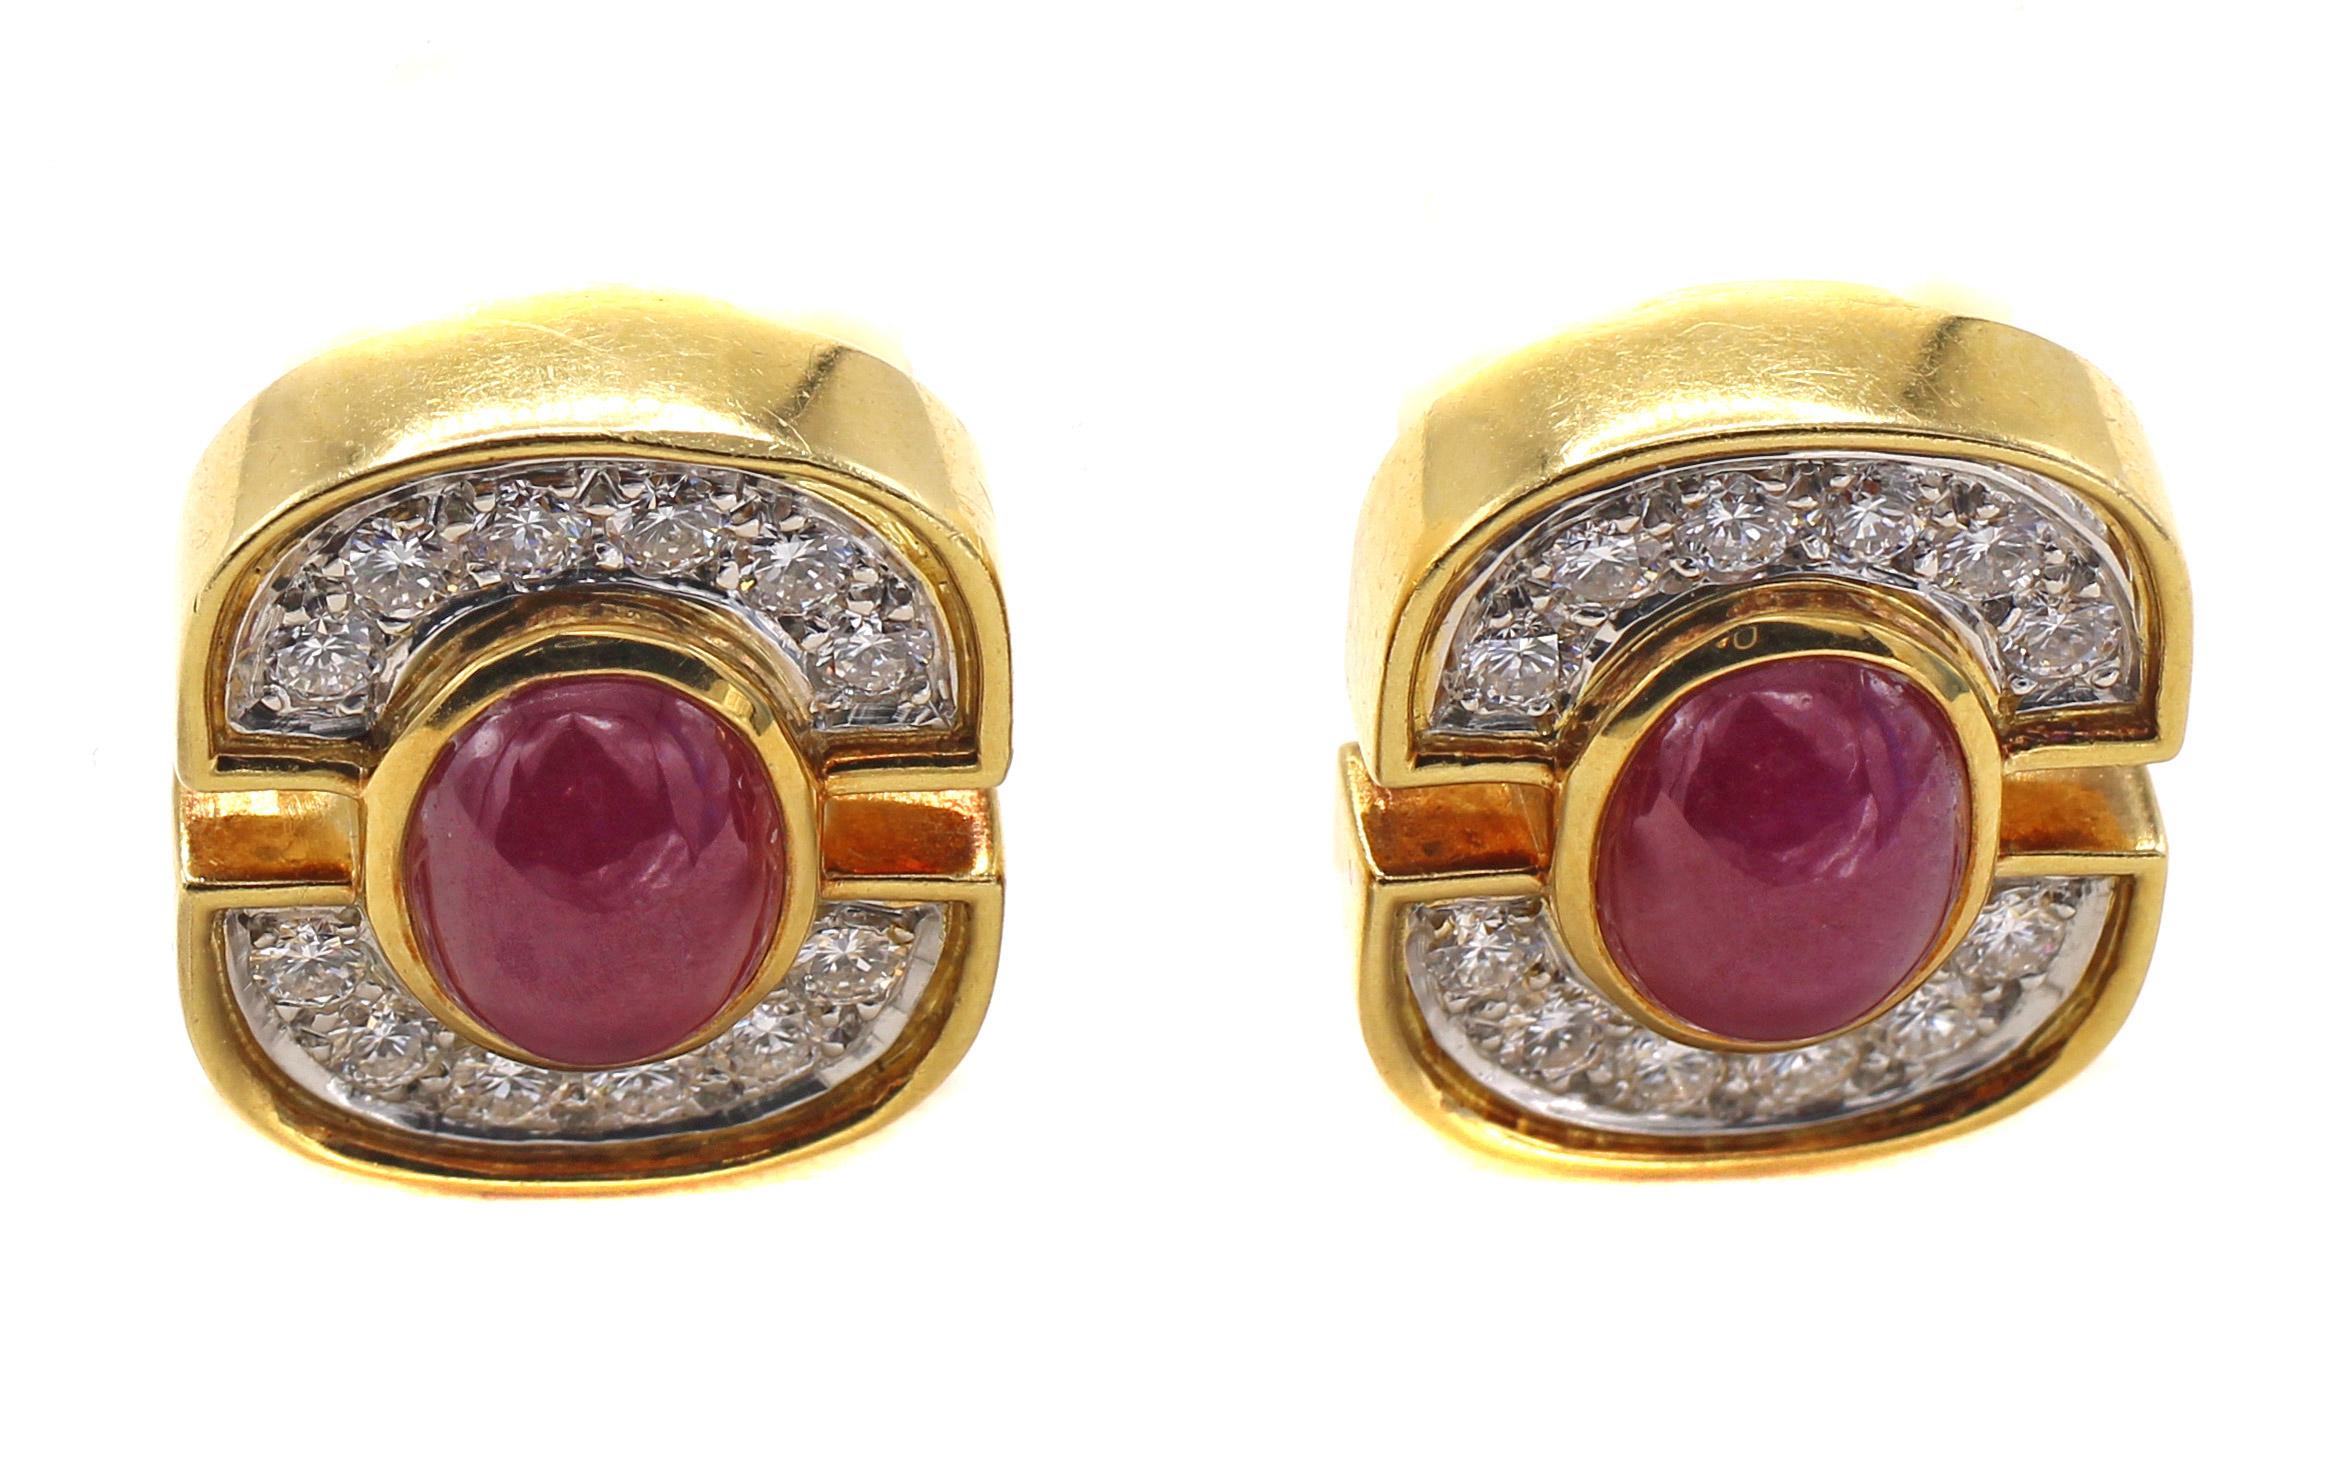 Chic 1980s yellow gold diamond ear clips set with 12 perfectly matched bright white and sparkly round brilliant cut diamonds in each ear clip centered by a bezel set oval cabochon ruby.